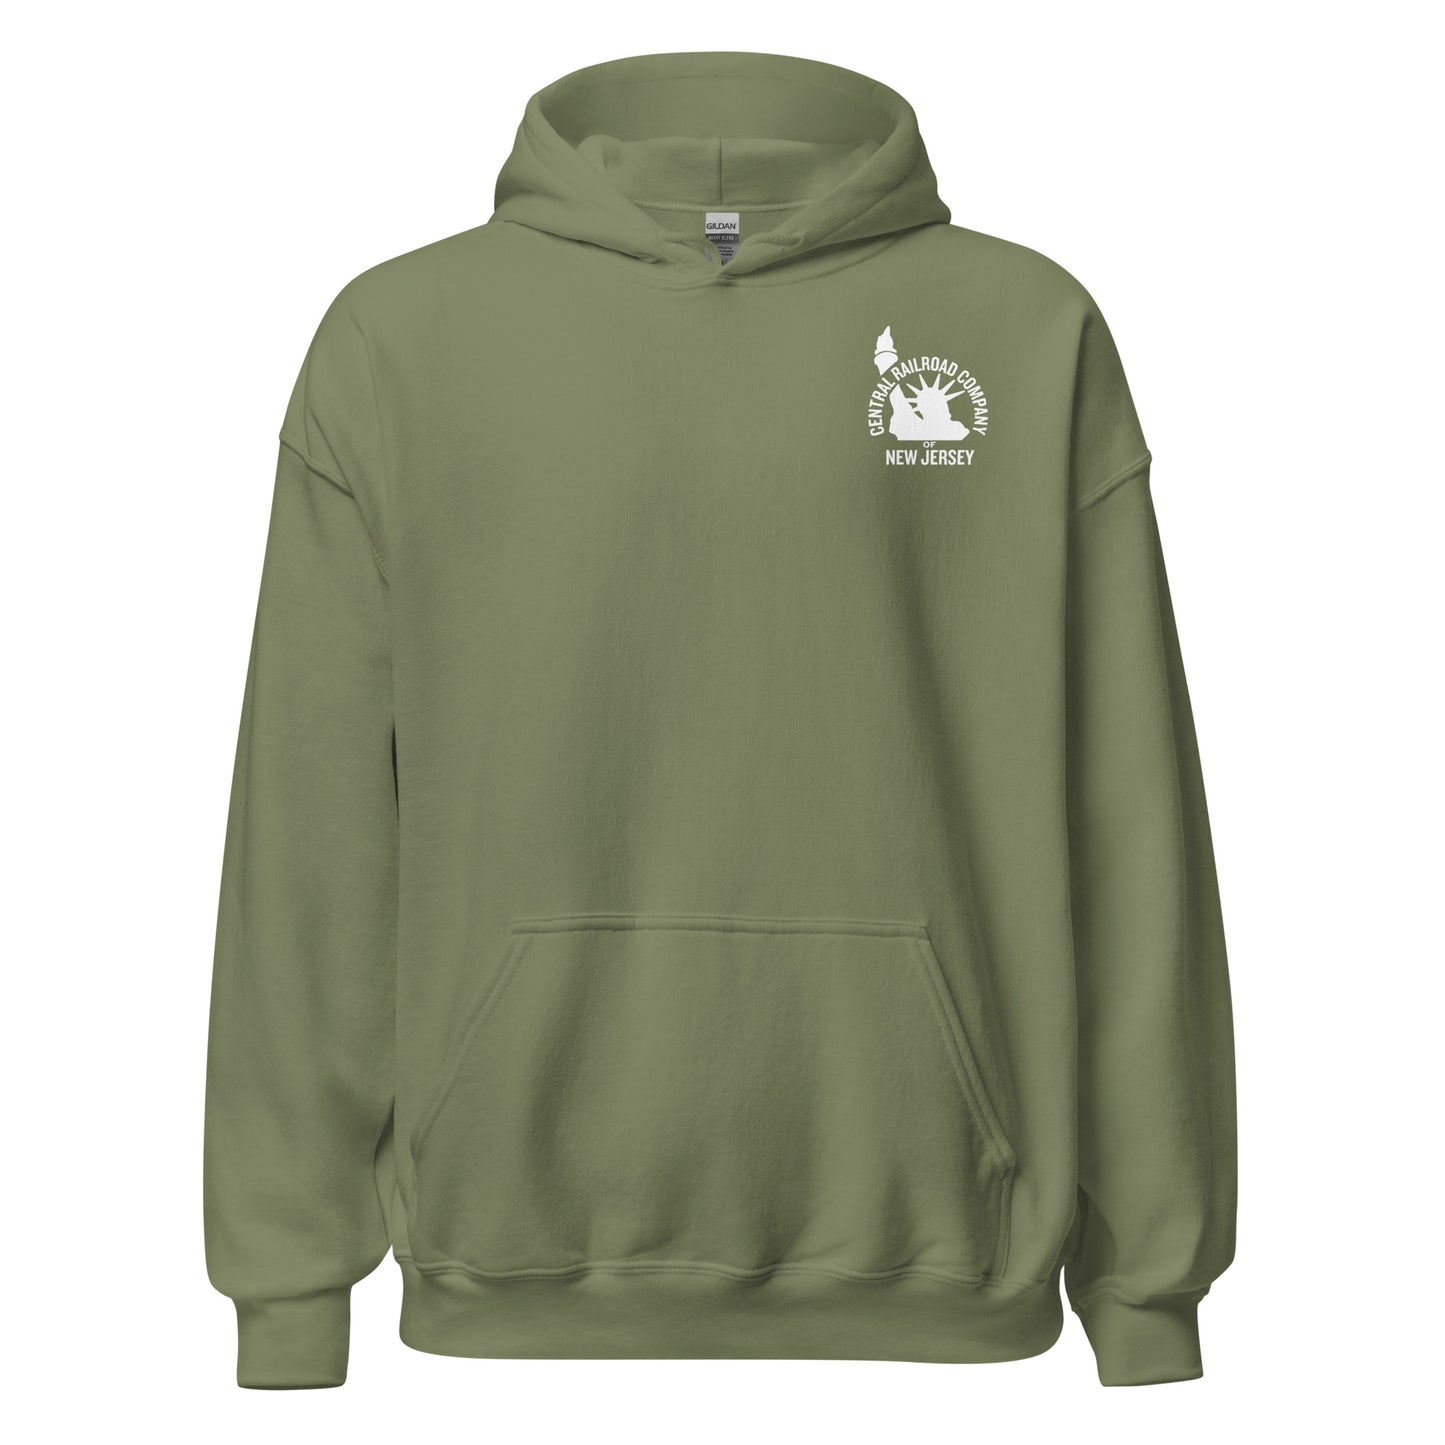 Central Railroad Company of New Jersey Unisex Hoodie